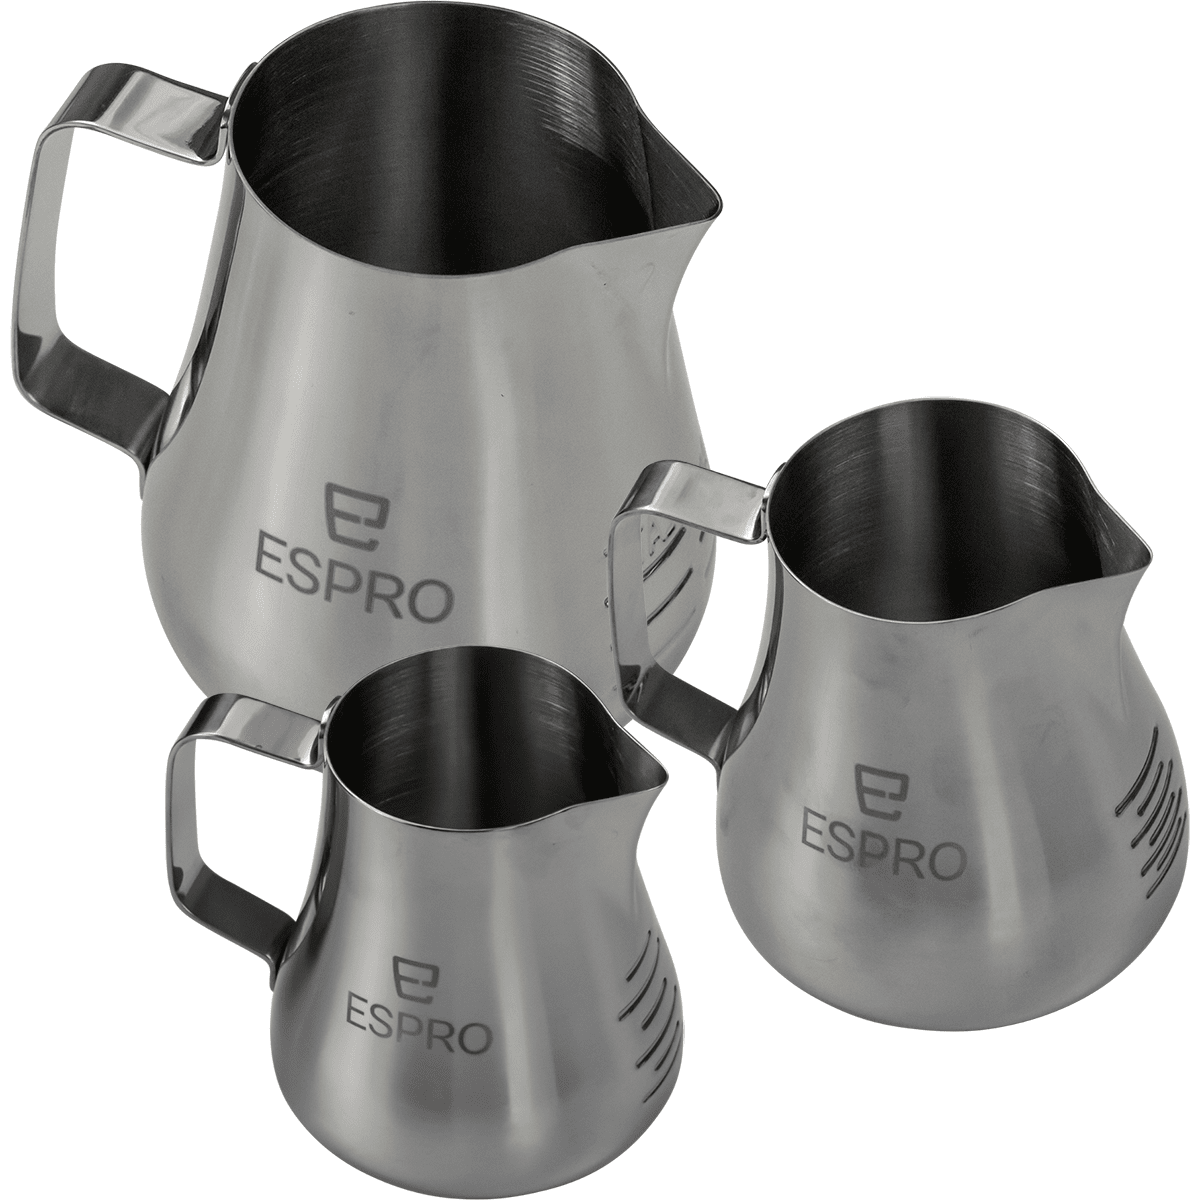 Espro Toroid 2 Steaming Pitchers